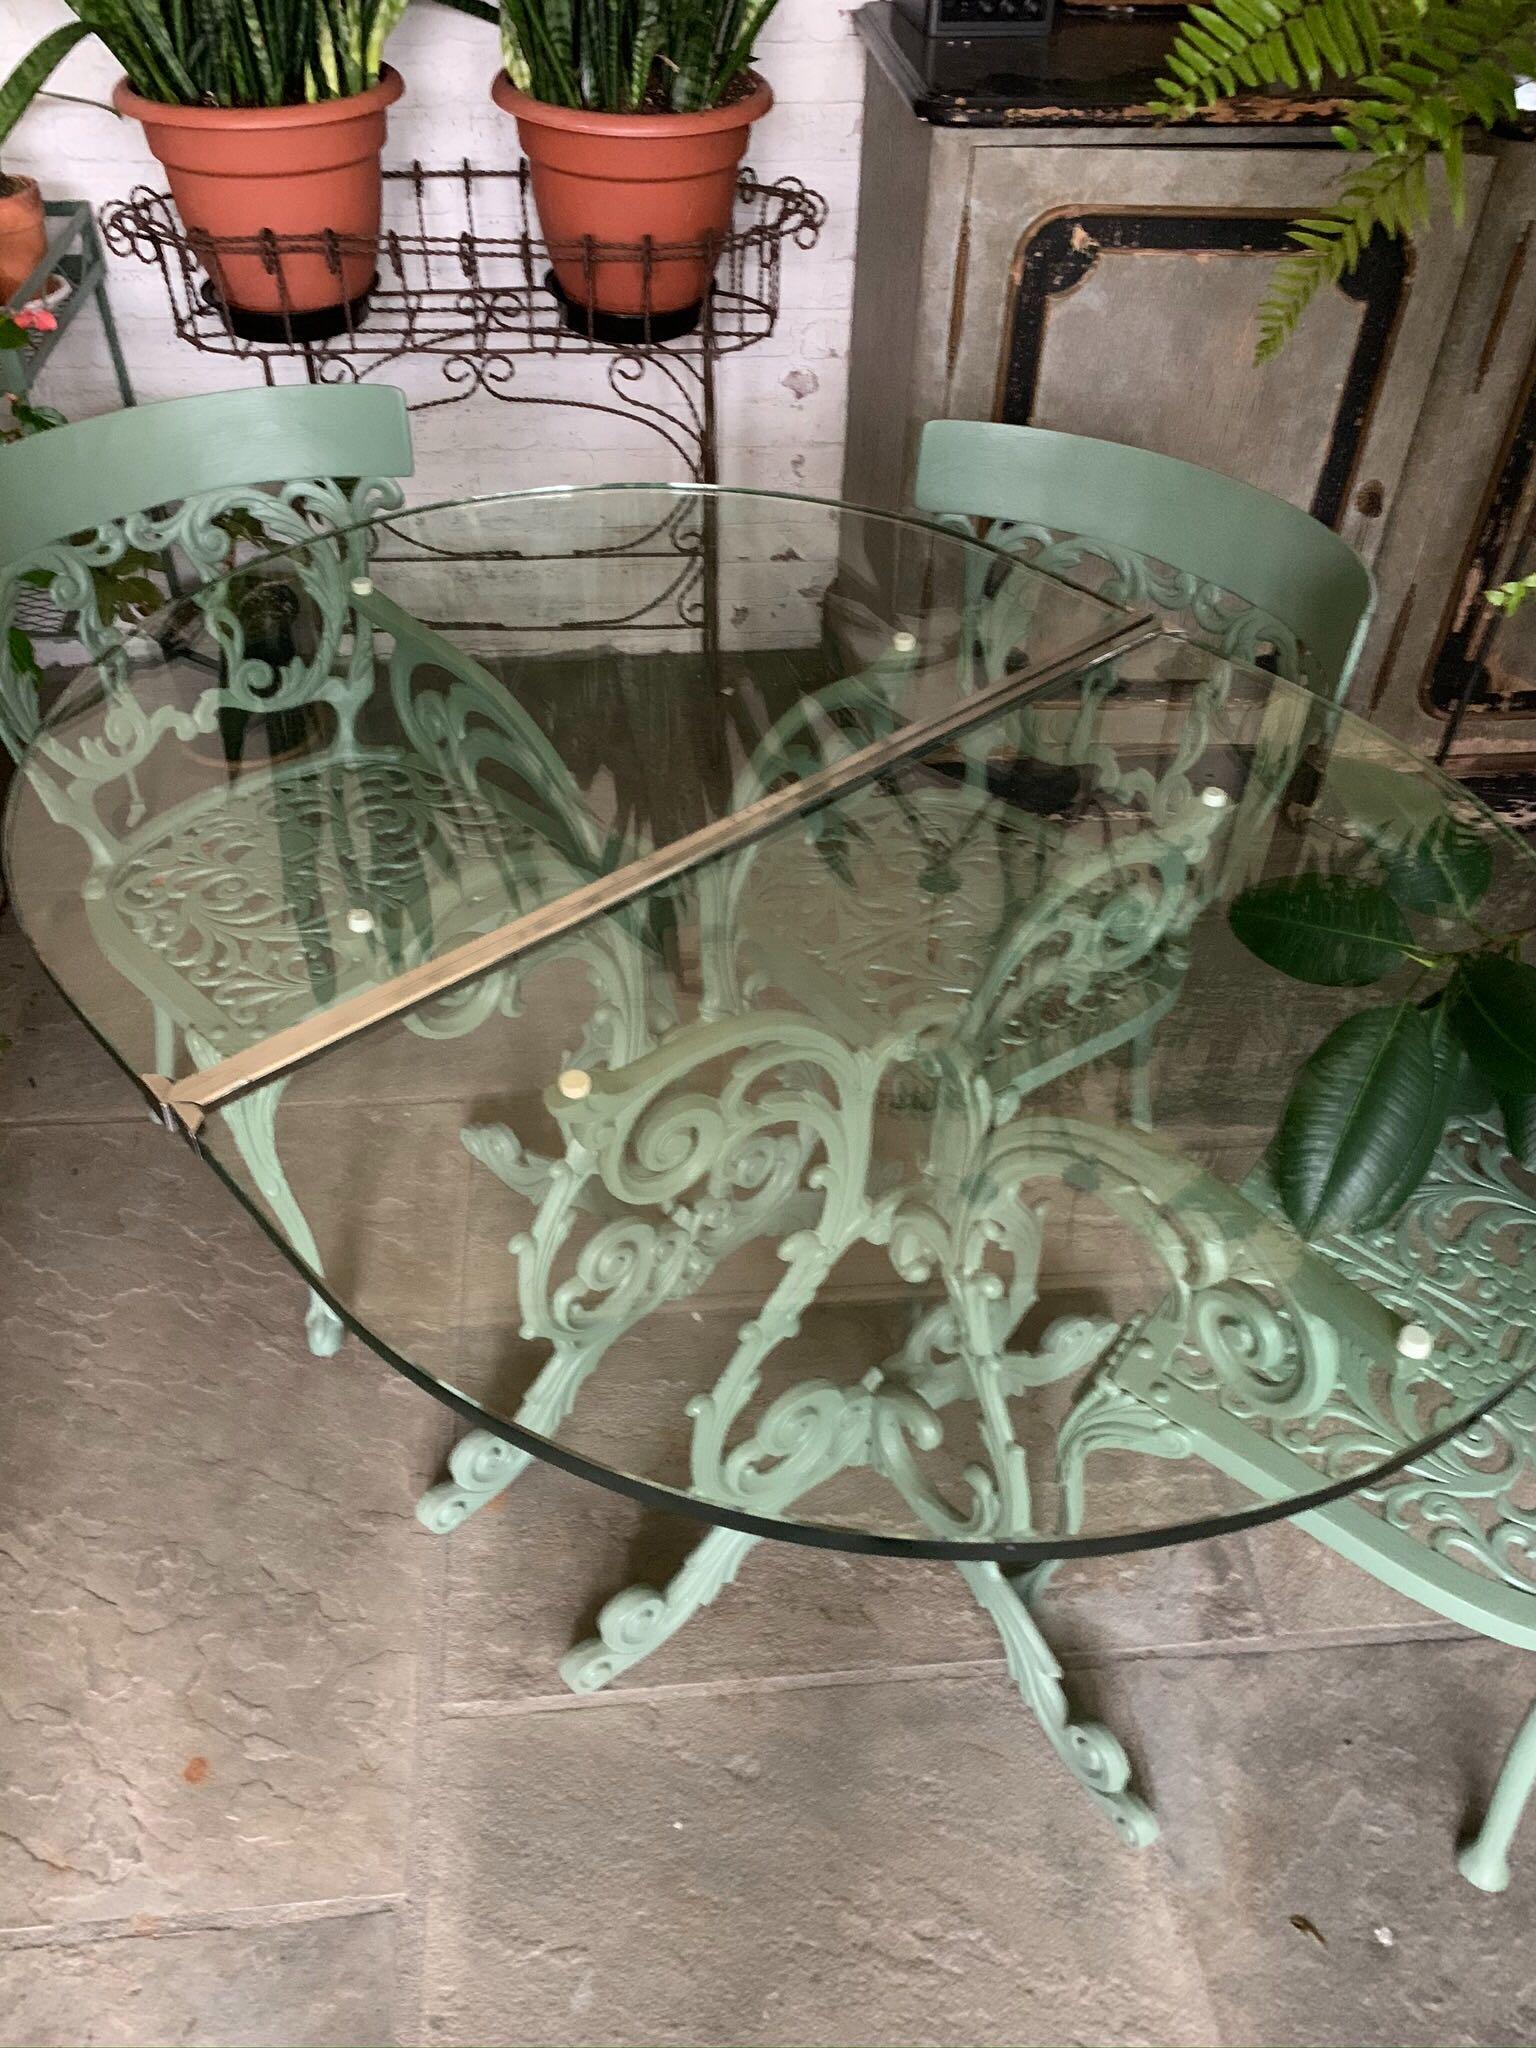 Neoclassical Revival Style Cast Iron Garden or Patio Furniture Chairs and Table 2